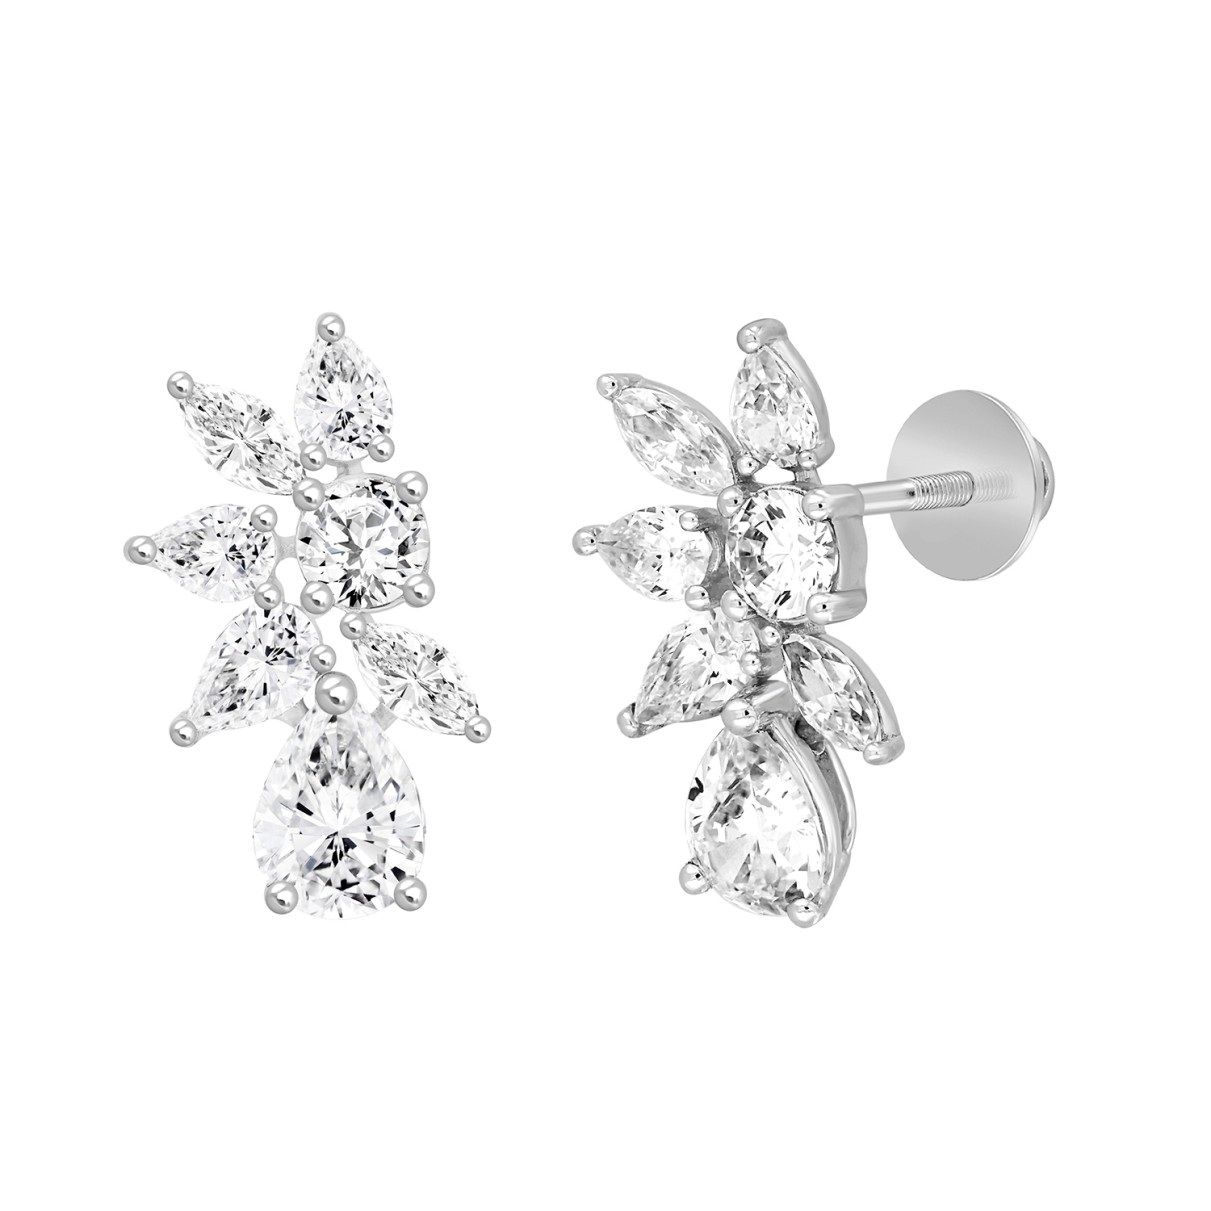 LADIES STUD EARRINGS  4 1/2CT PEAR/ROUND/MARQUISE DIAMOND 14K WHITE GOLD